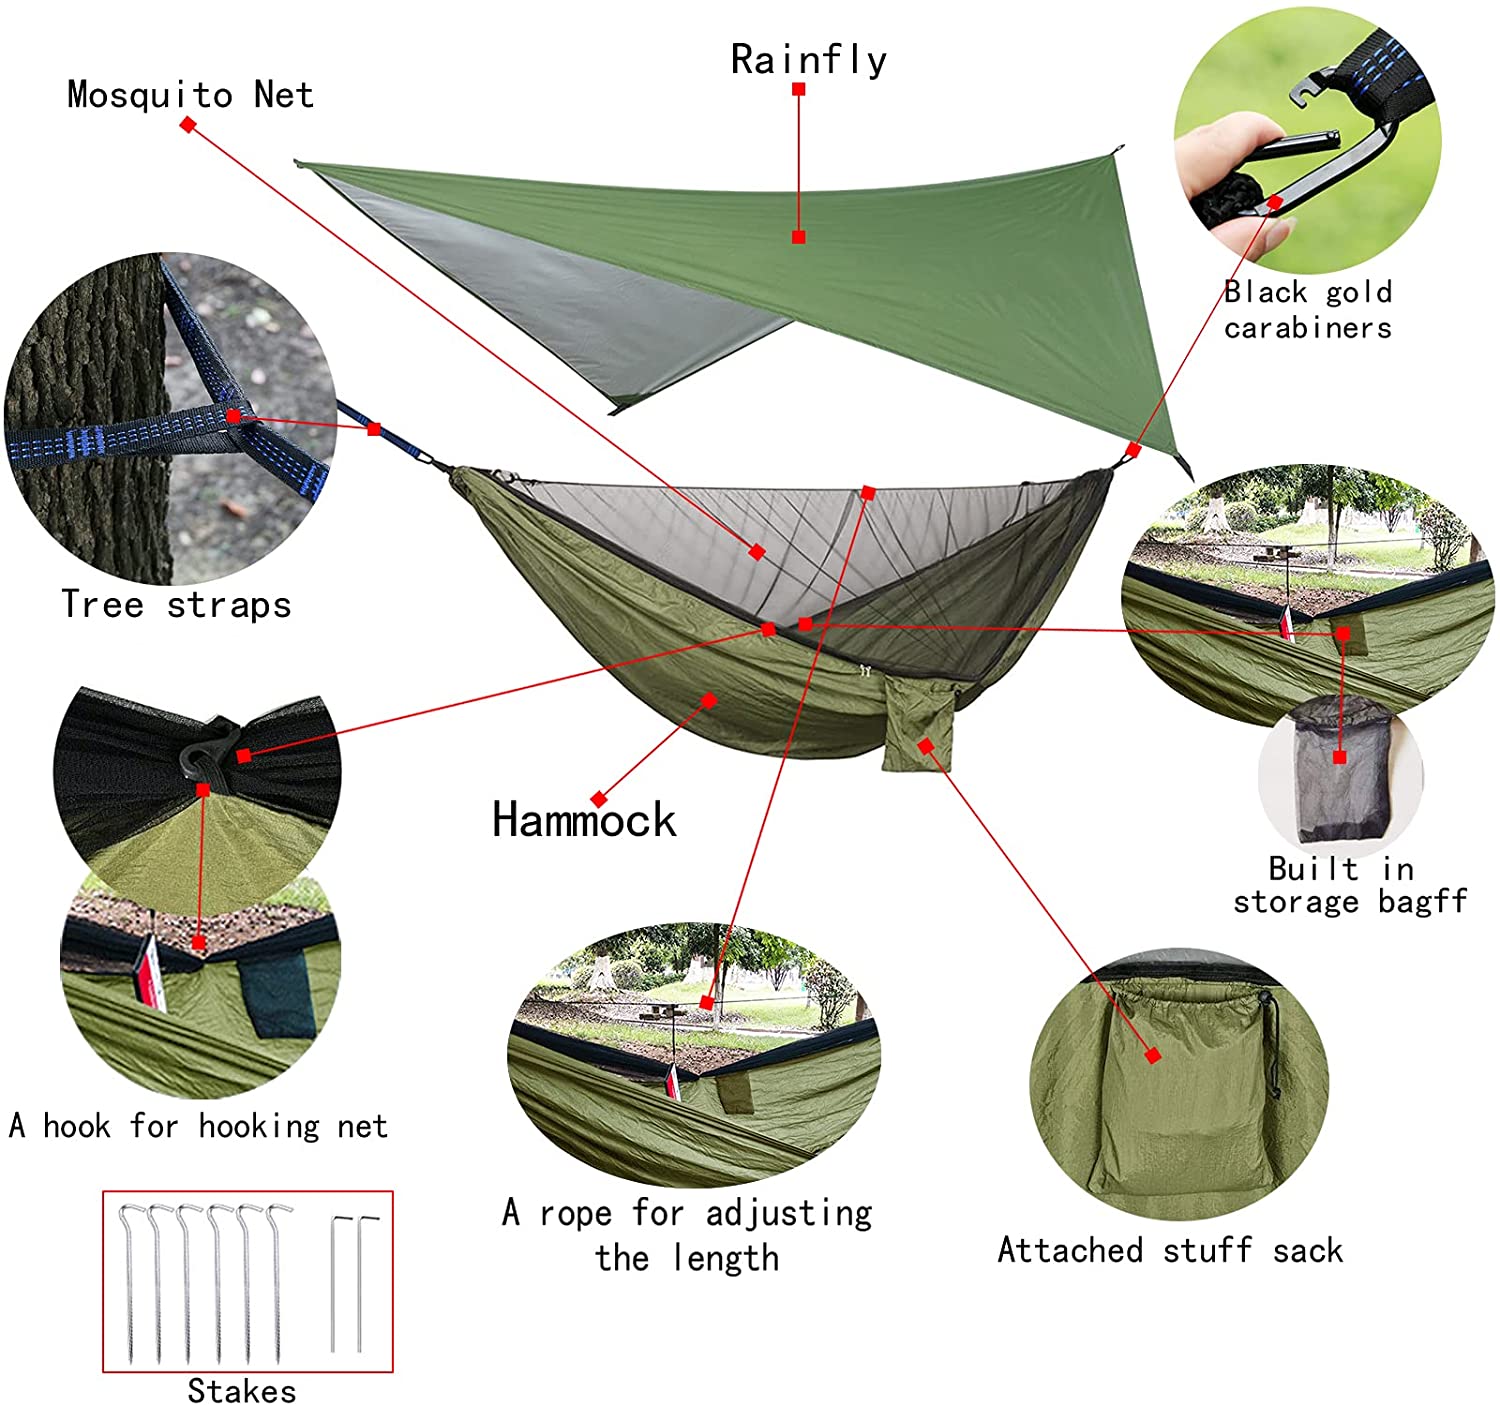 Camping Hammock with PU Rain Fly Tarp and Mosquito Net Tent Tree Straps, Portable Single Double Nylon Parachute Hammock Rainfly Set for Backpacking Hiking Travel Yard Outdoor Activities Army green